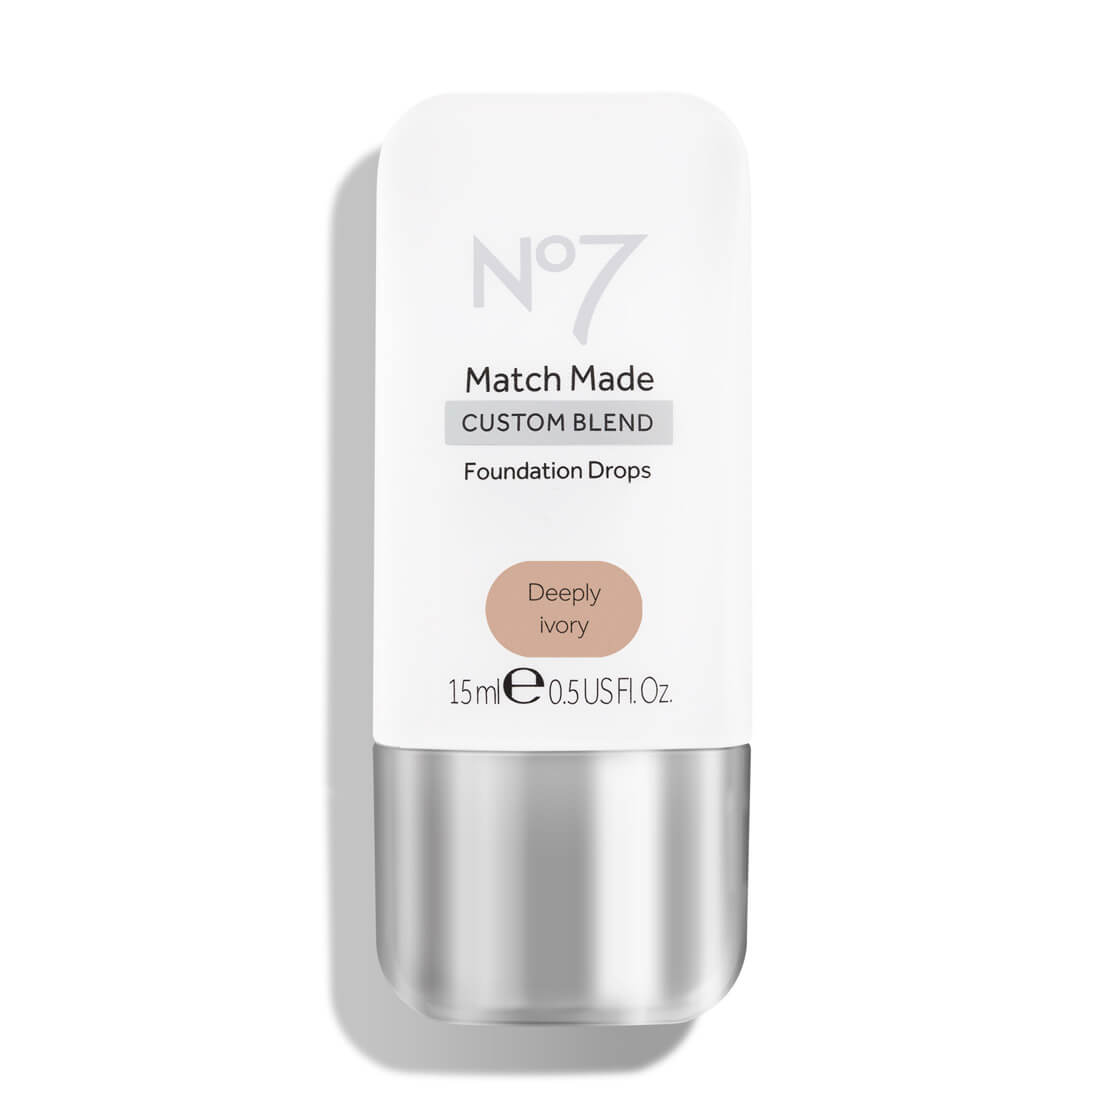 Match Made Foundation Drops (Various Shades) - 5 Deeply Ivory